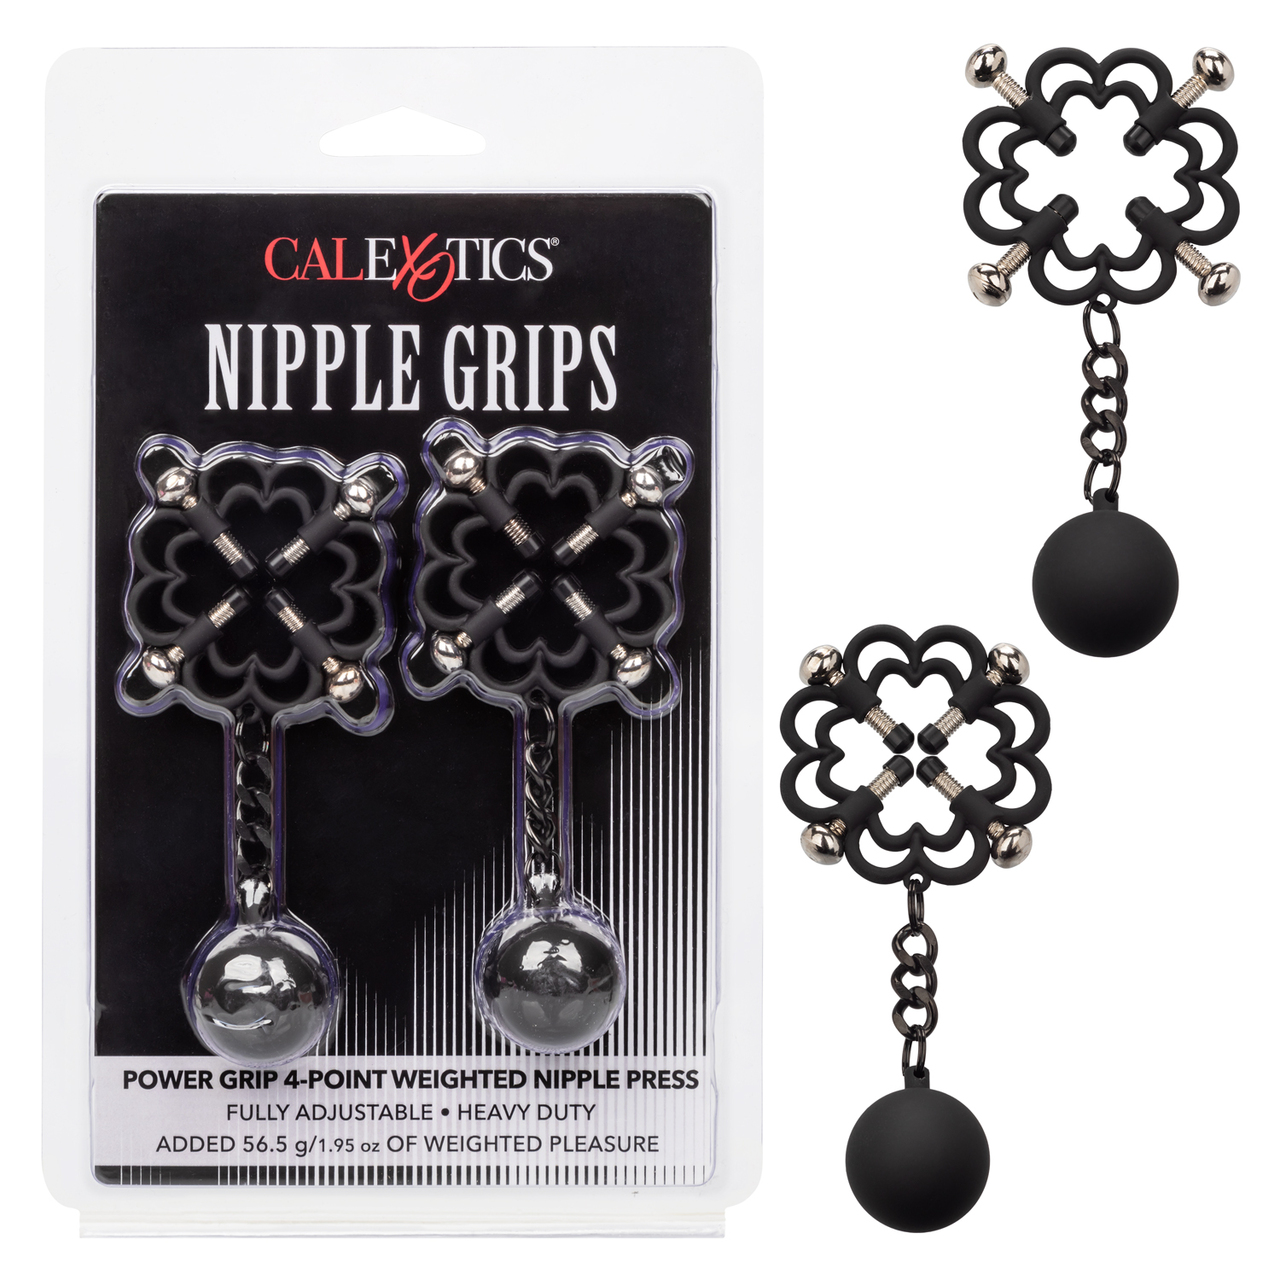 NIPPLE GRIPS POWER GRIP 4 POINT WEIGHTED PRESS 